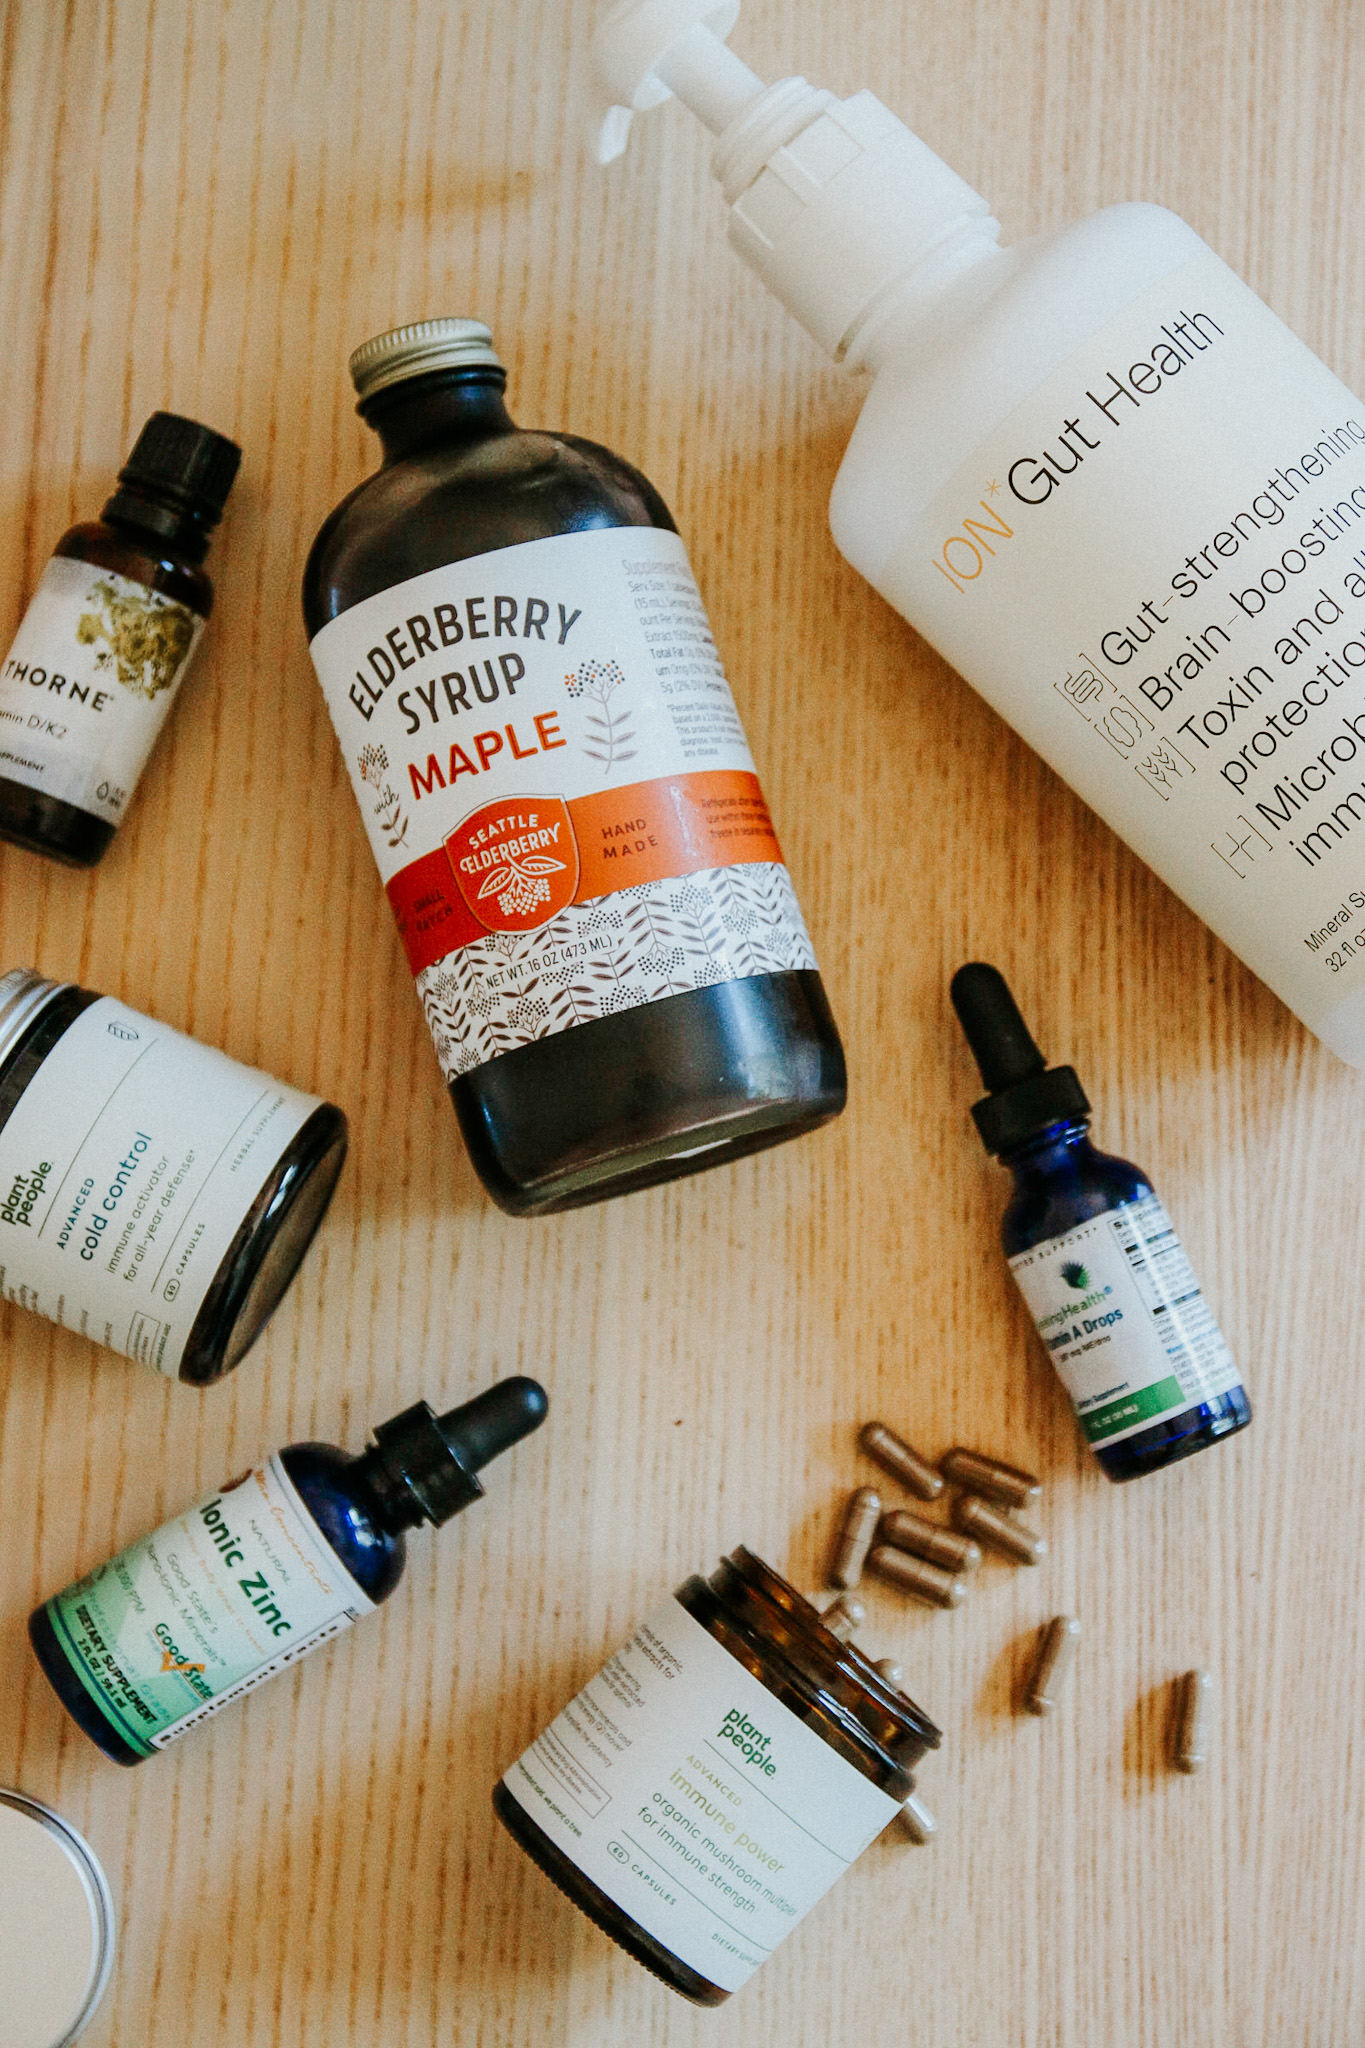 My Favourite Immune-Boosters and Supplements